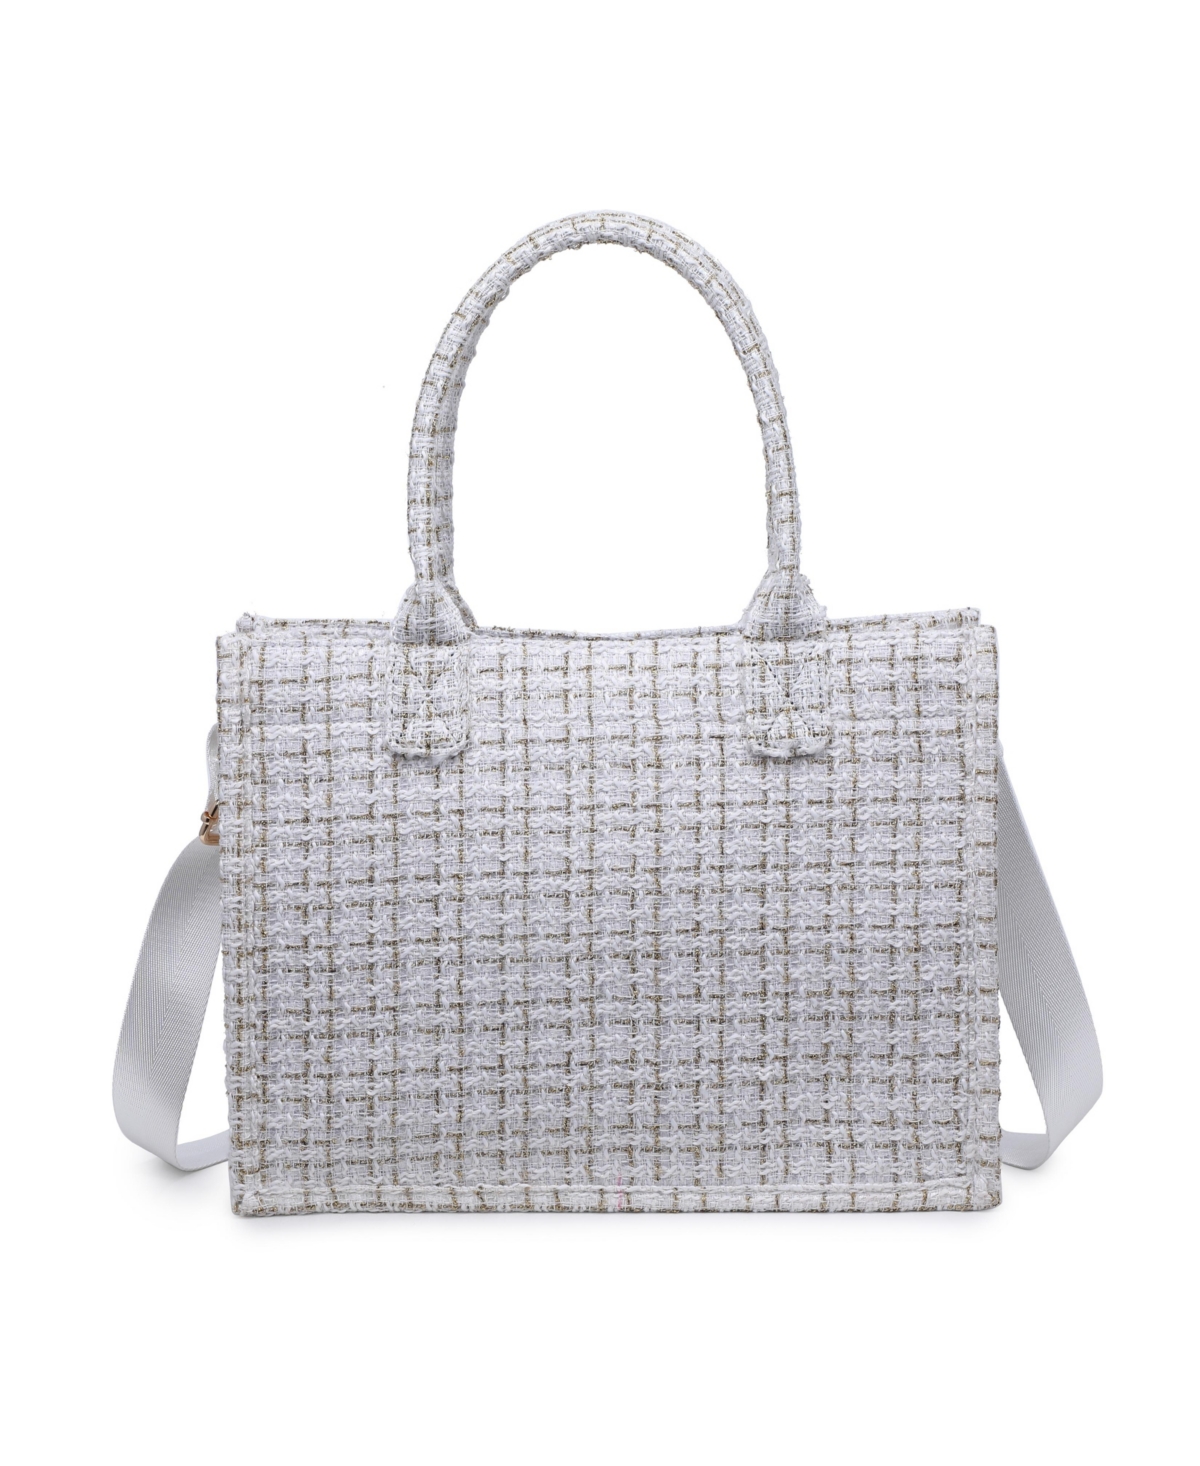 Urban Expressions Morgan Tweed Tote Bag In Ivory Gold